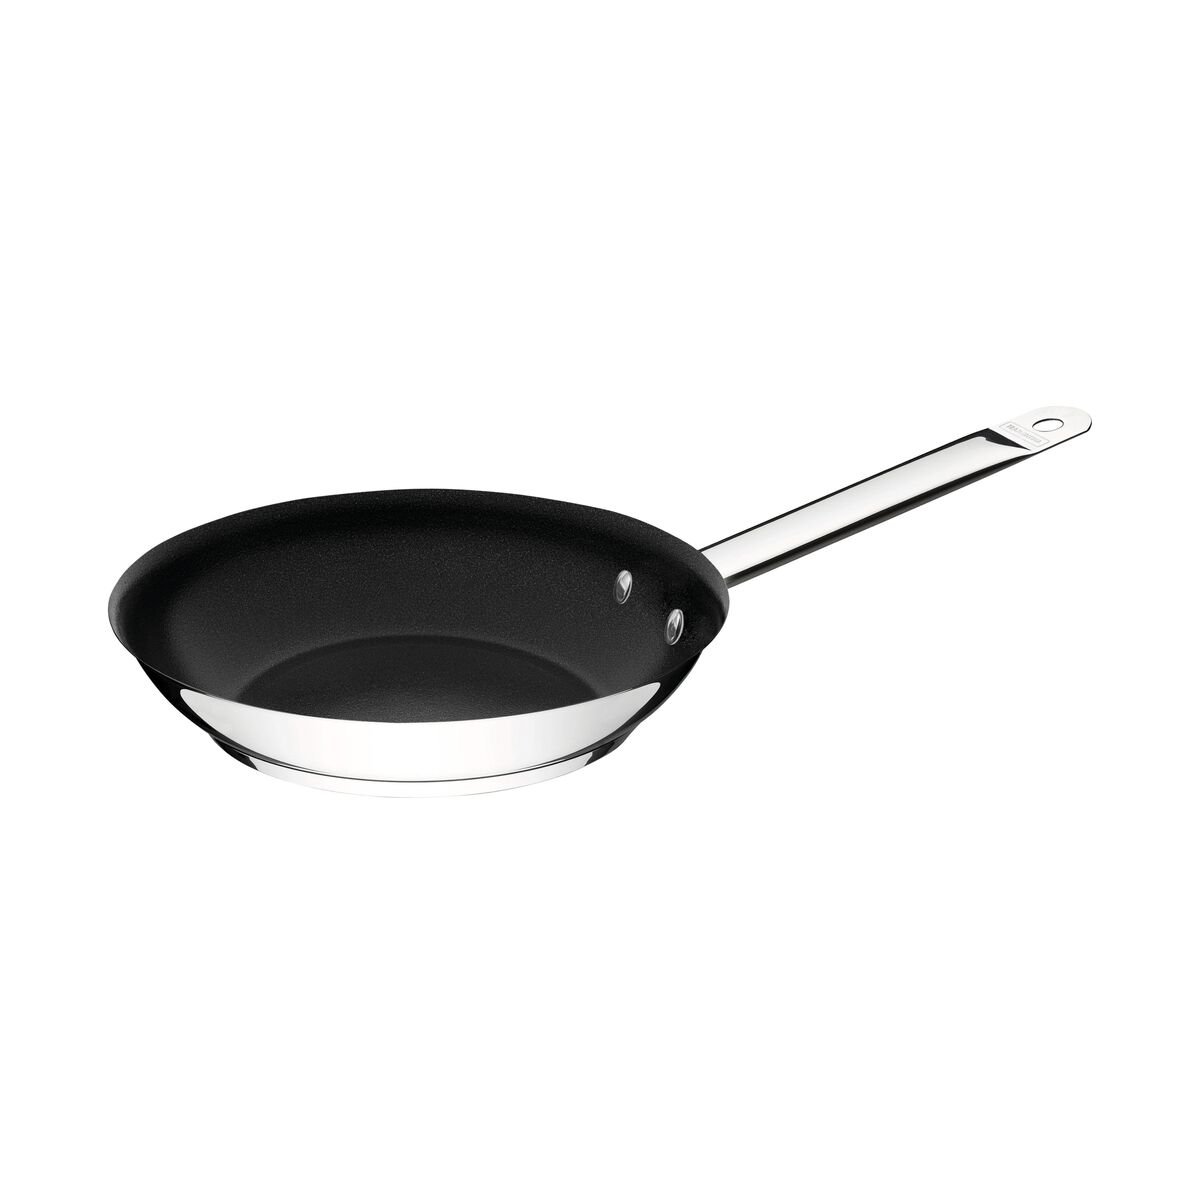 Tramontina Professional 20 cm 1.1 L shallow stainless steel frying pan with long handle, tri-ply base and interior non-stick coating